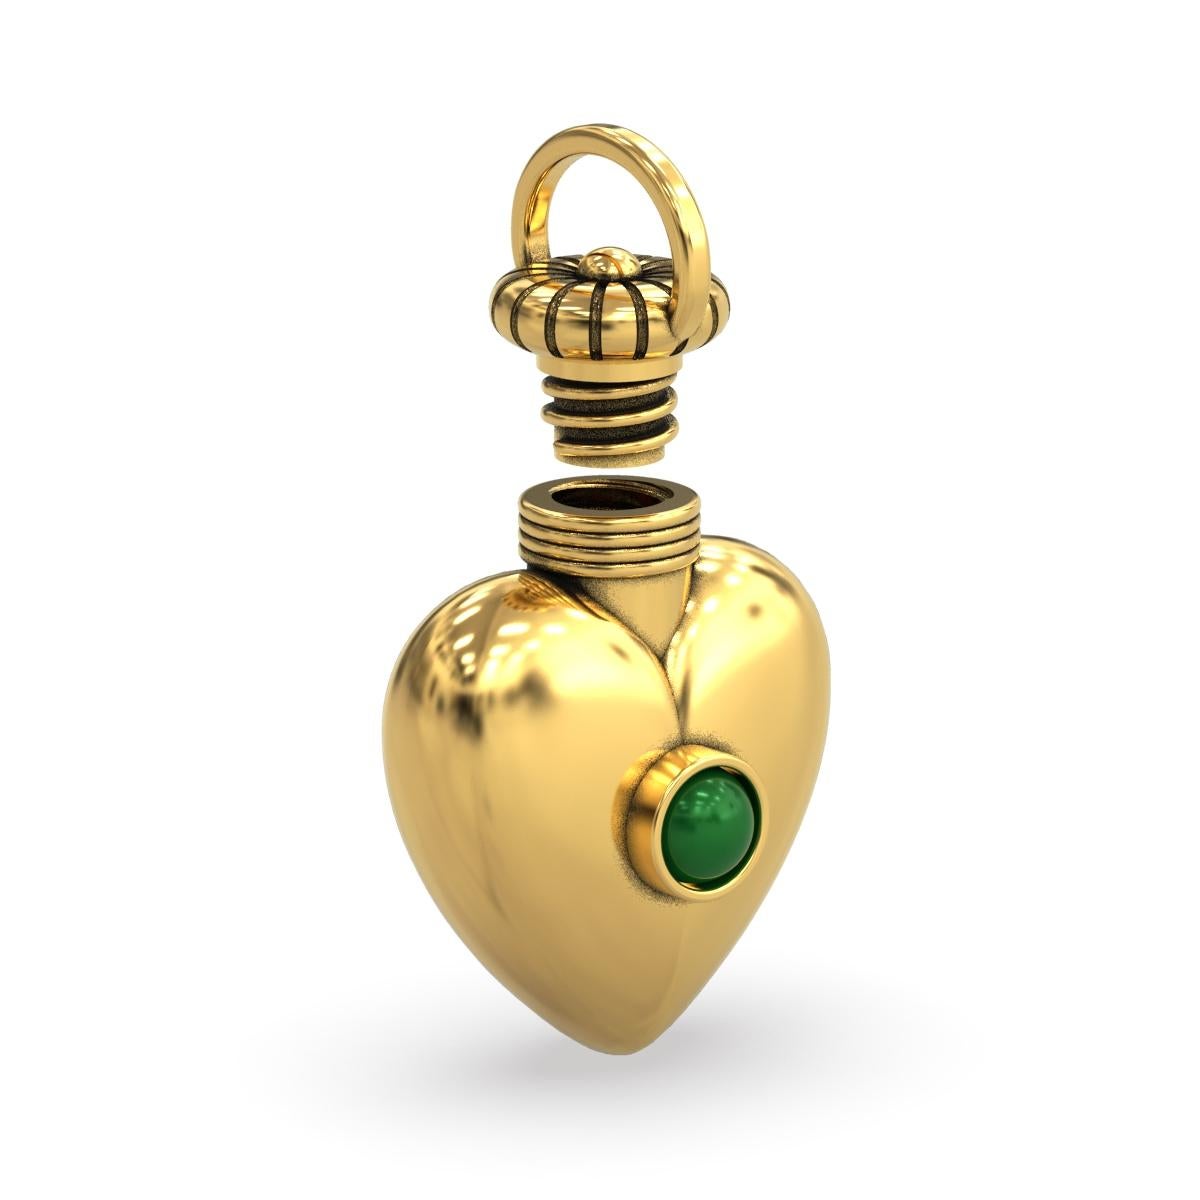 Puffed Heart Bottle Pendant Necklace in 18k Gold Vermeil with Green Peridot In New Condition For Sale In Manalapan, FL